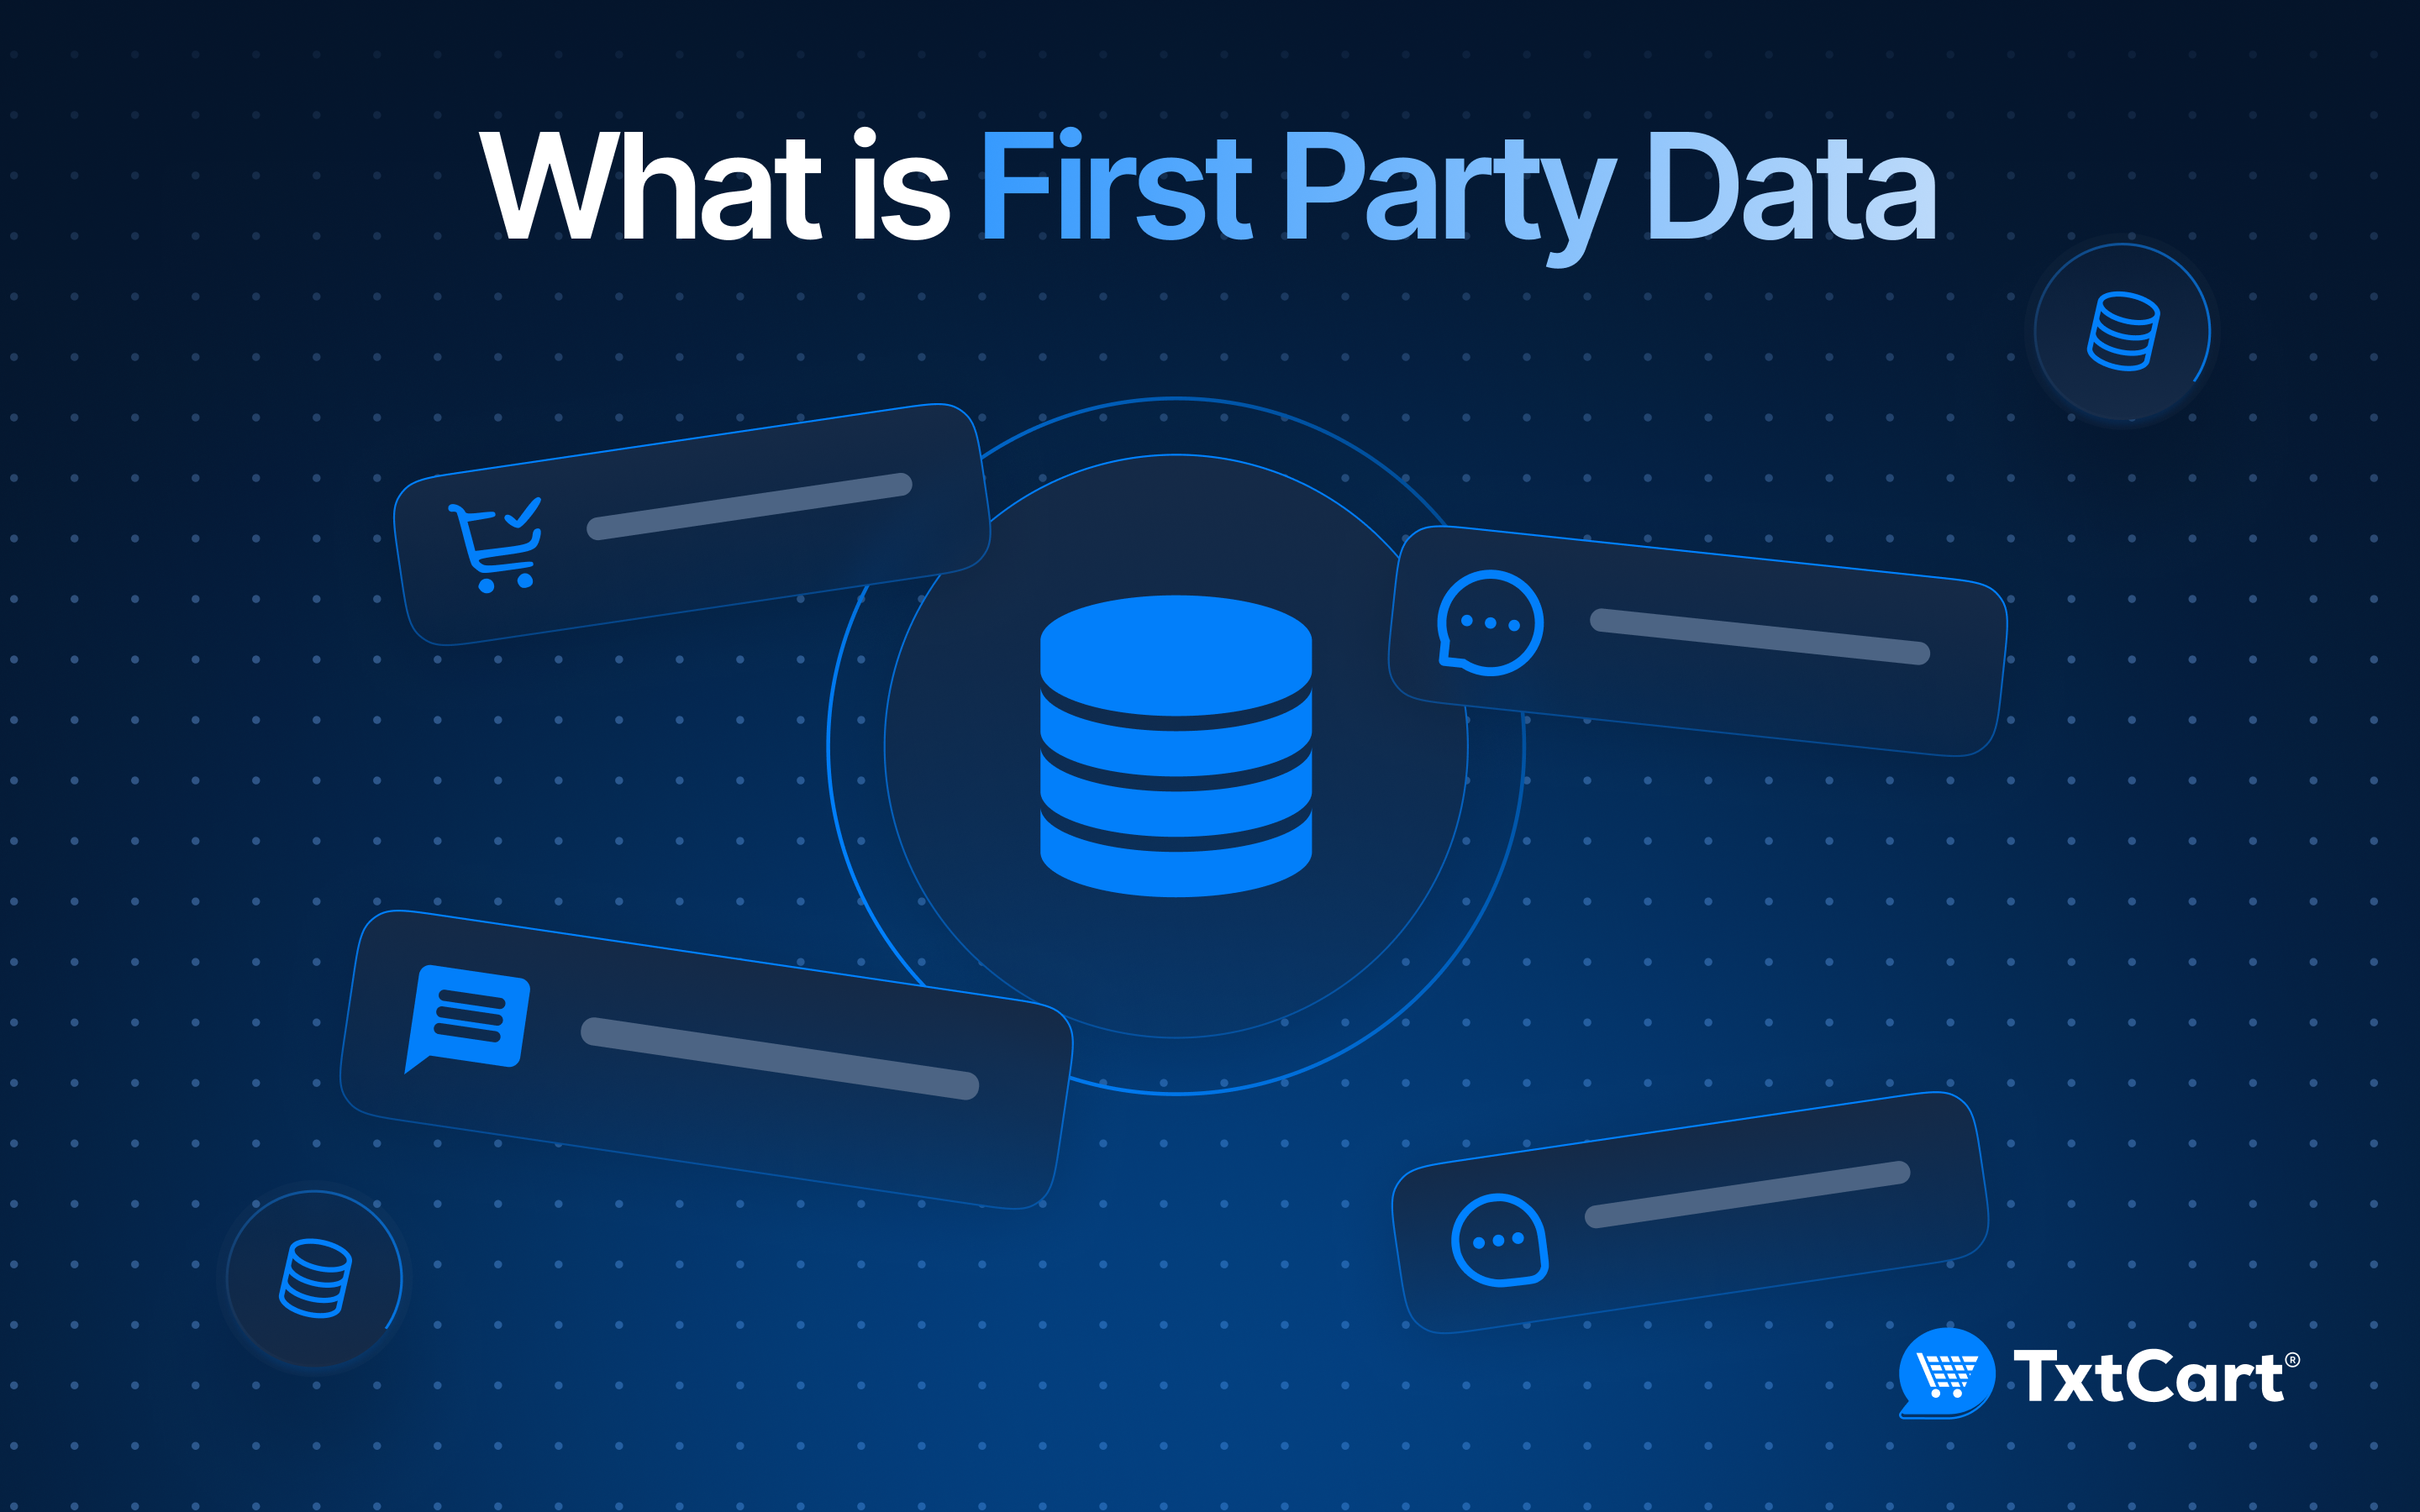 What is First Party Data and How Can You Leverage SMS Marketing to Acquire It